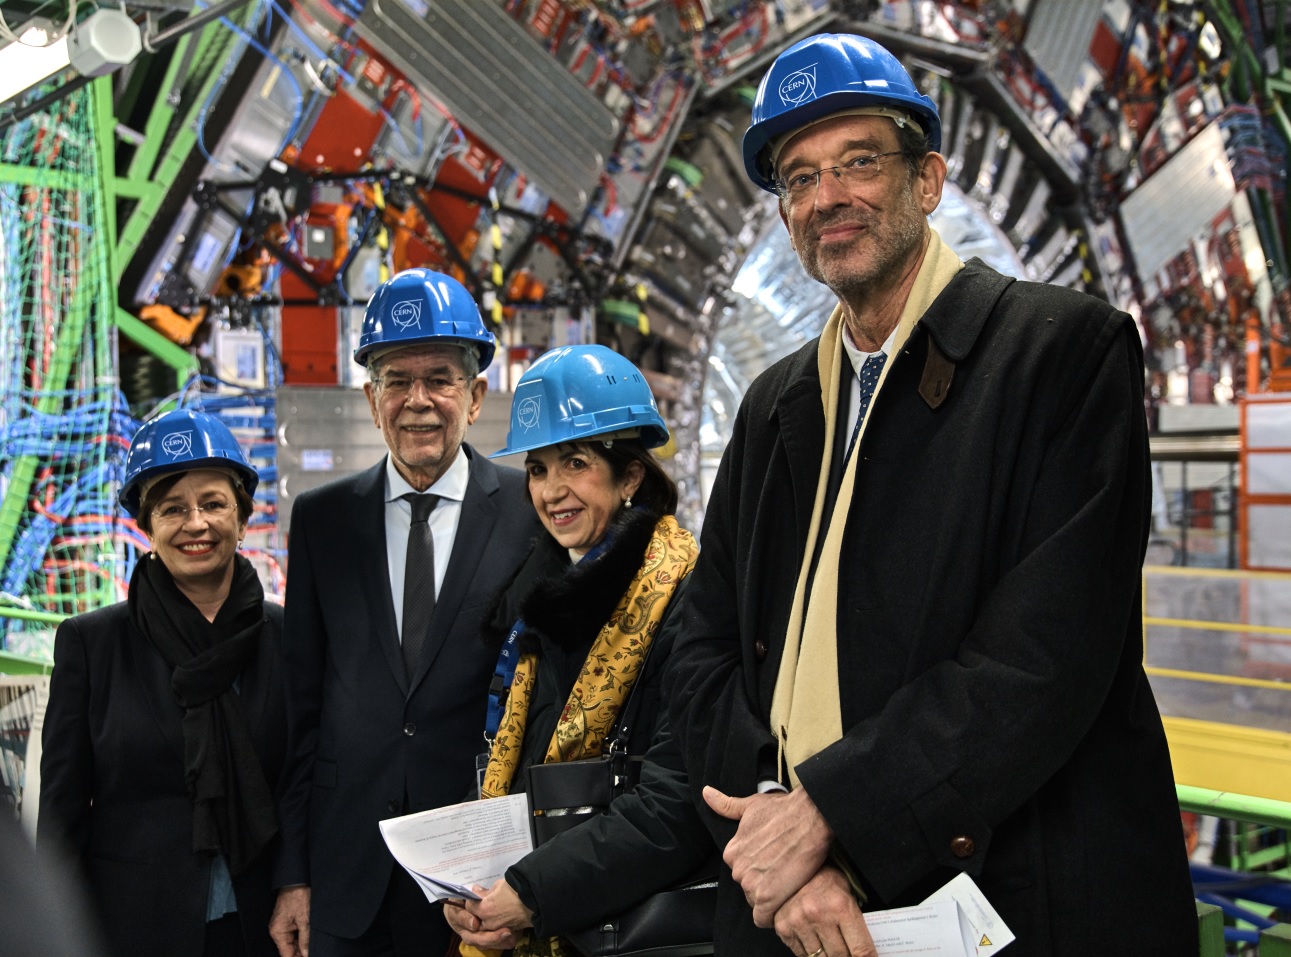 High-level visits to CERN